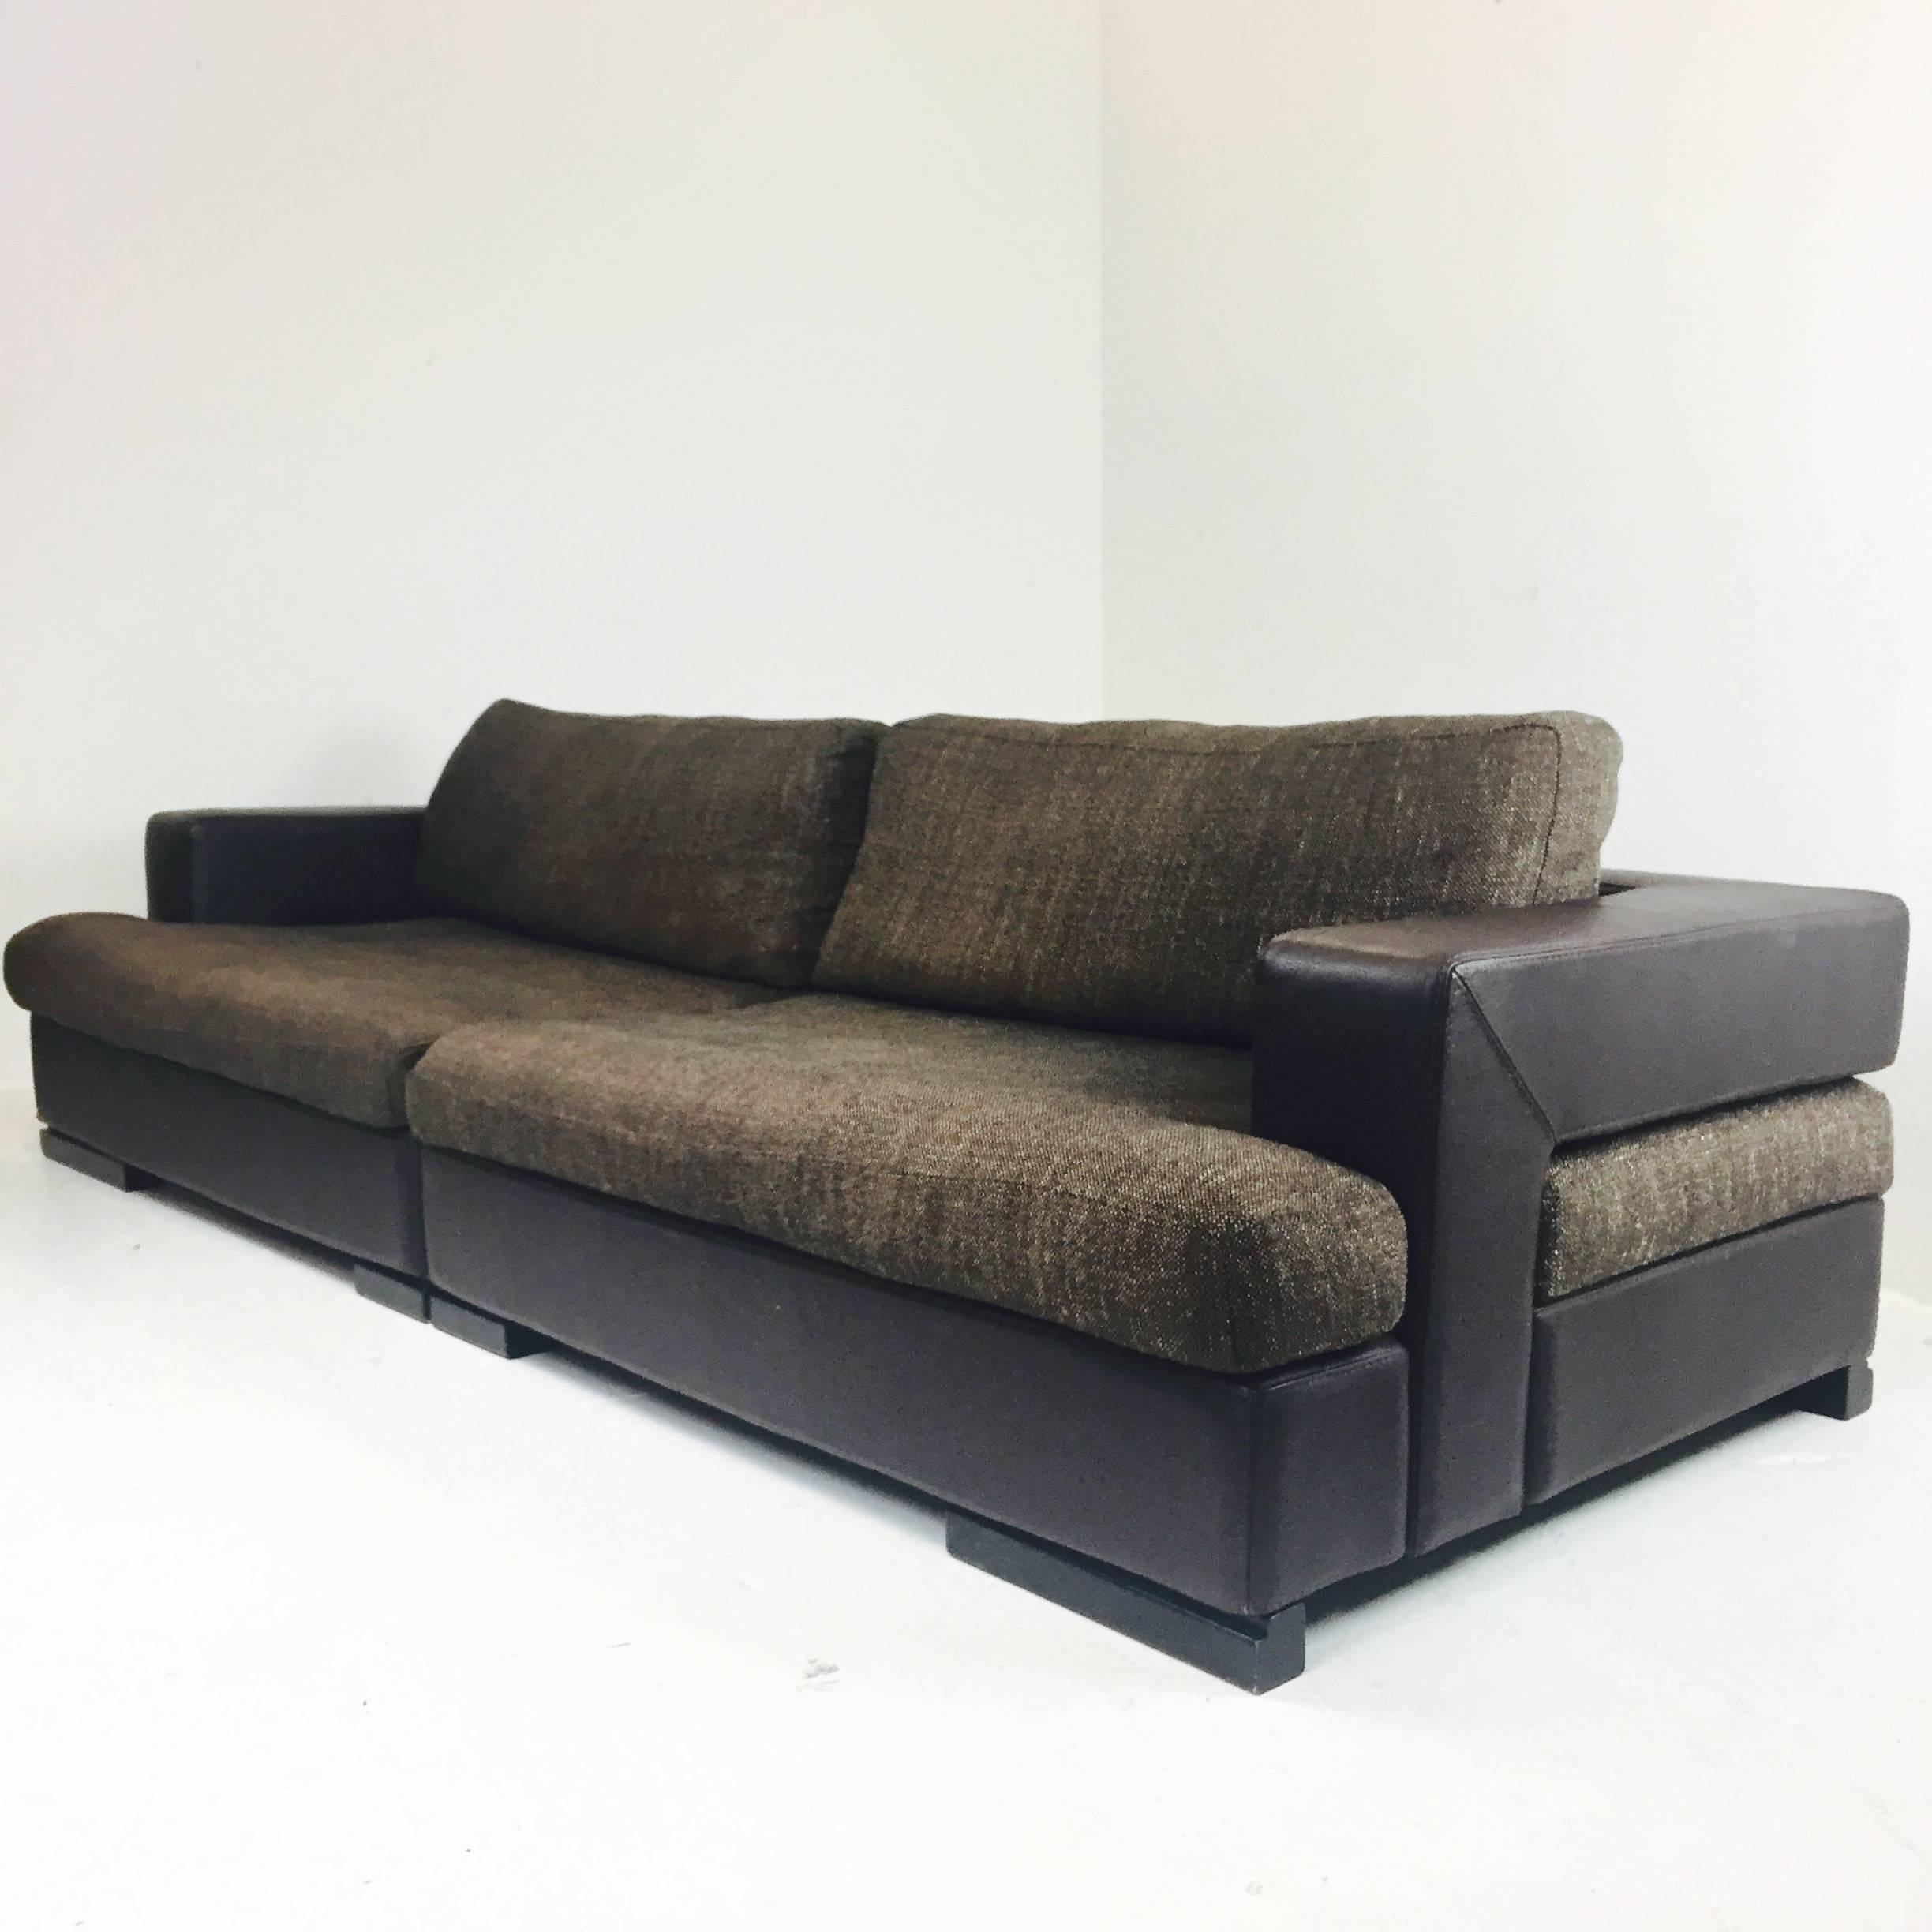 Roche Bobois two-piece sectional sofa. The sofa is in good condition will some wear.

dimensions: 91" W x 51.5" D x 21" T
seat height 15".